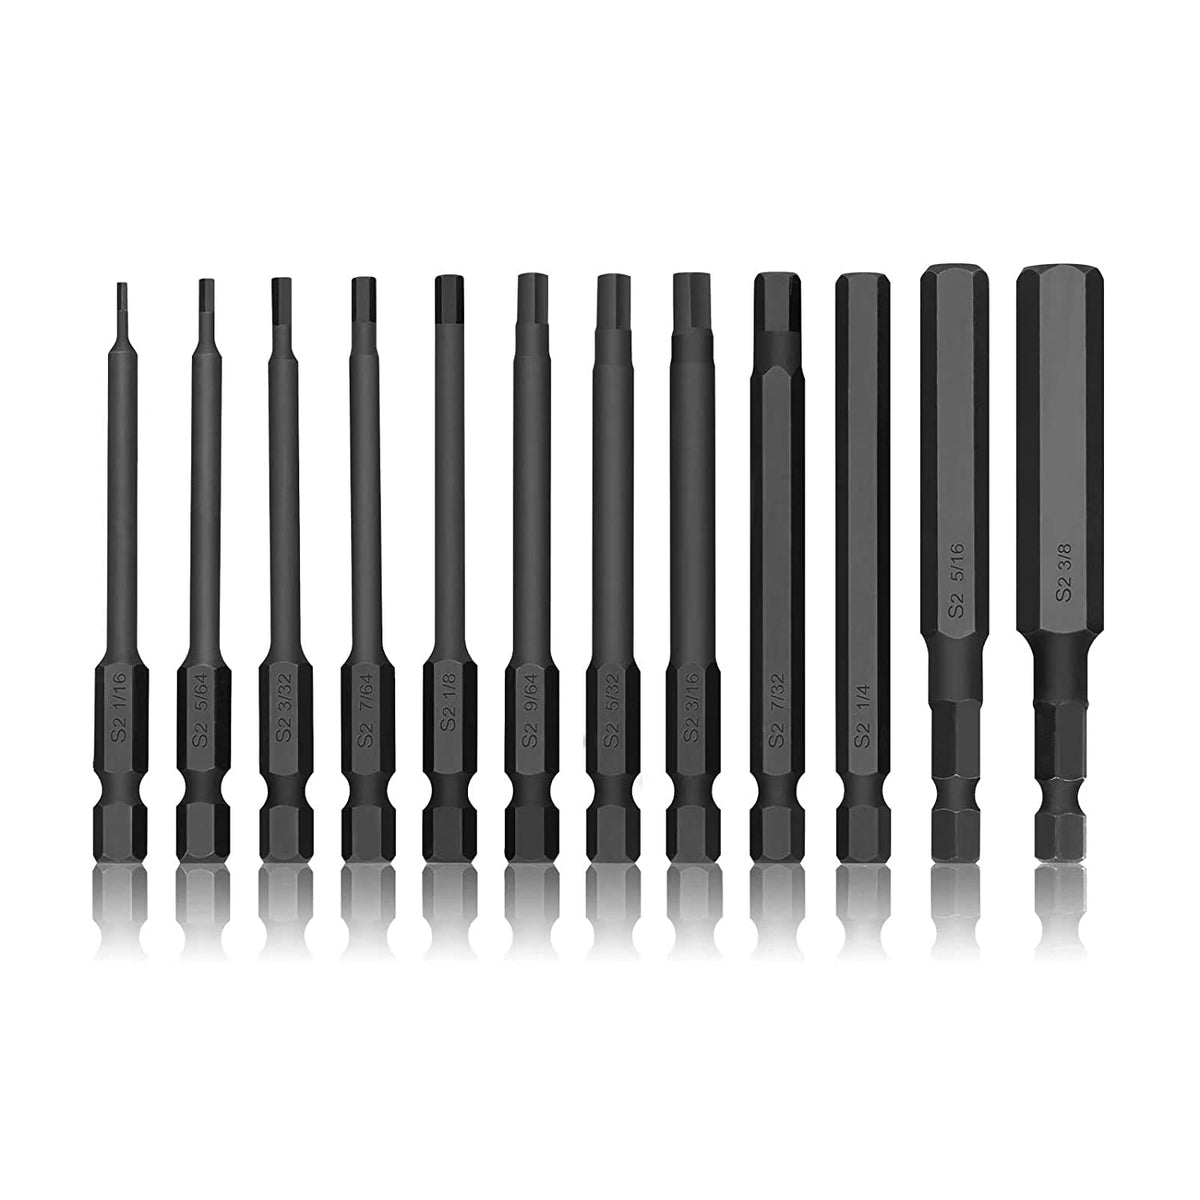 Metric Allen Wrench Drill Bit Set - Premium 12pc Complete SAE Set w/Storage  Case and Bit Holder - 1.5mm - 10mm 1/4in Hex Shank Magnetic Bit Set - The